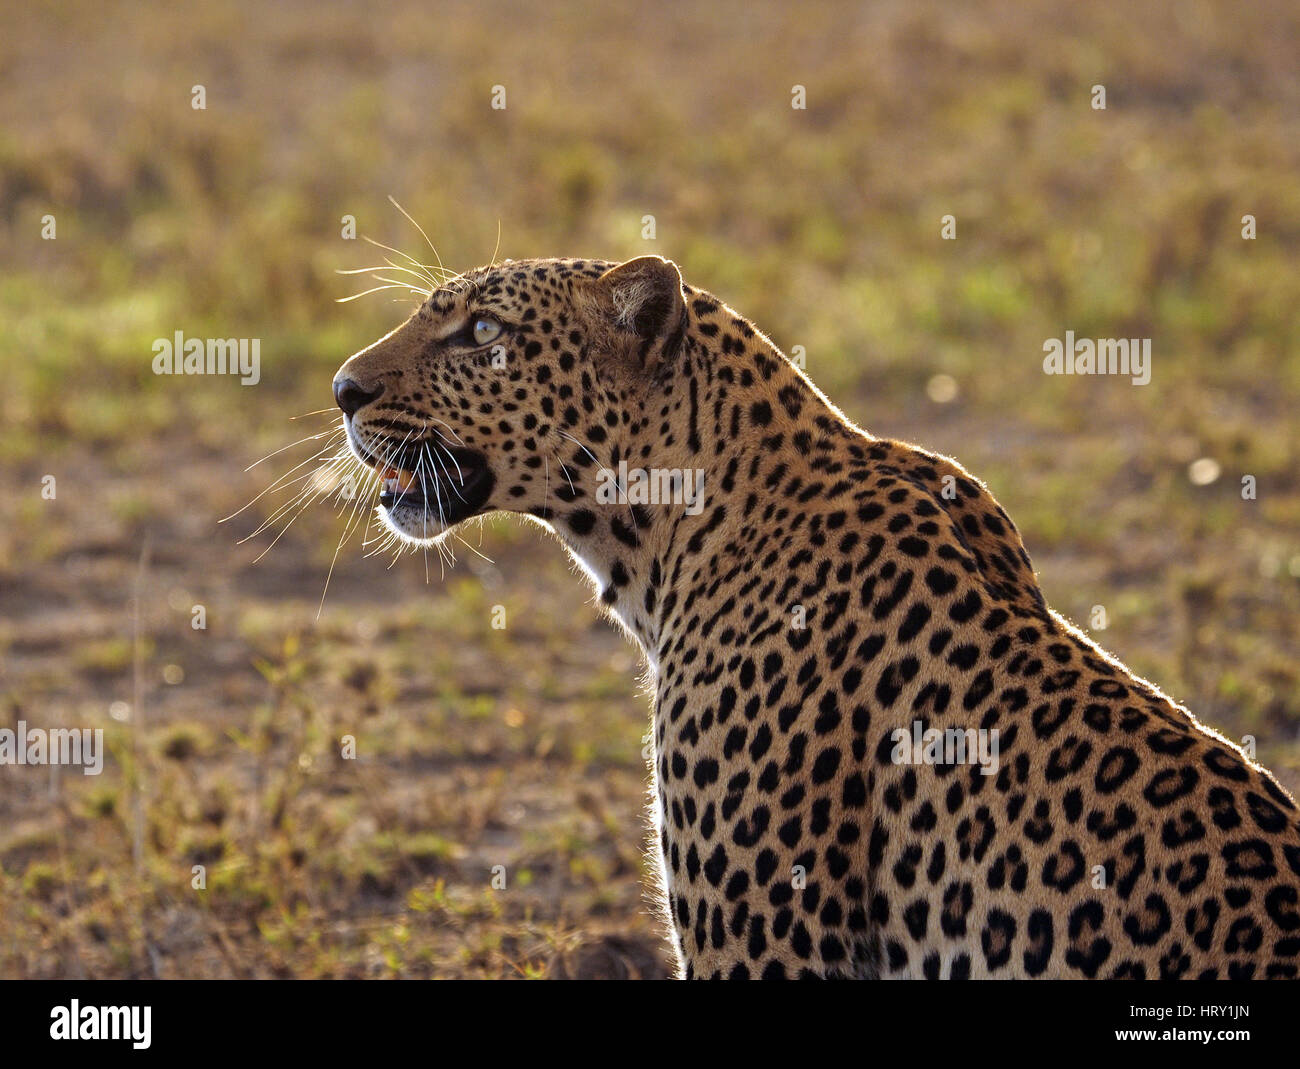 backlit Leopard (Panthera pardus) sitting on open ground in the Masai Mara Conservancies, Greater Mara, Kenya Africa showing long facial whiskers Stock Photo